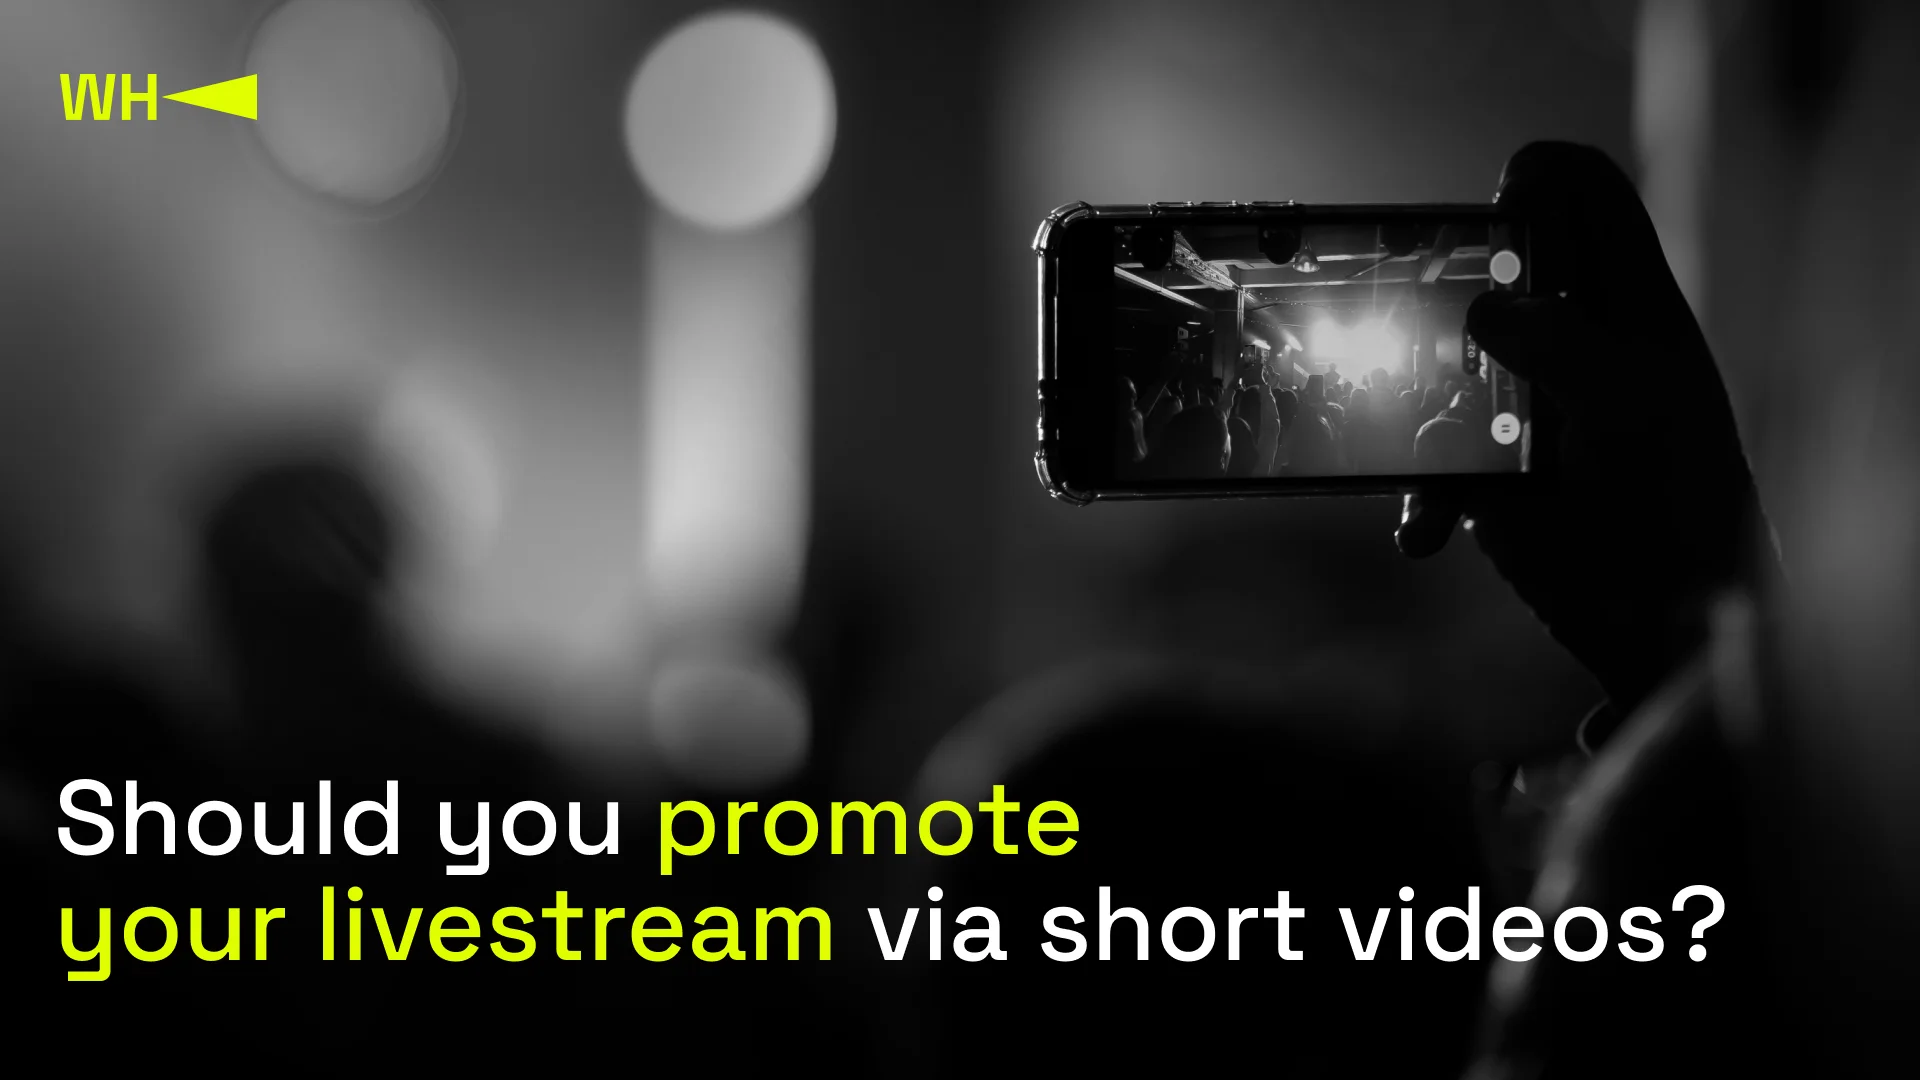 Should you promote your livestream via short videos. Credits: WePlay Holding